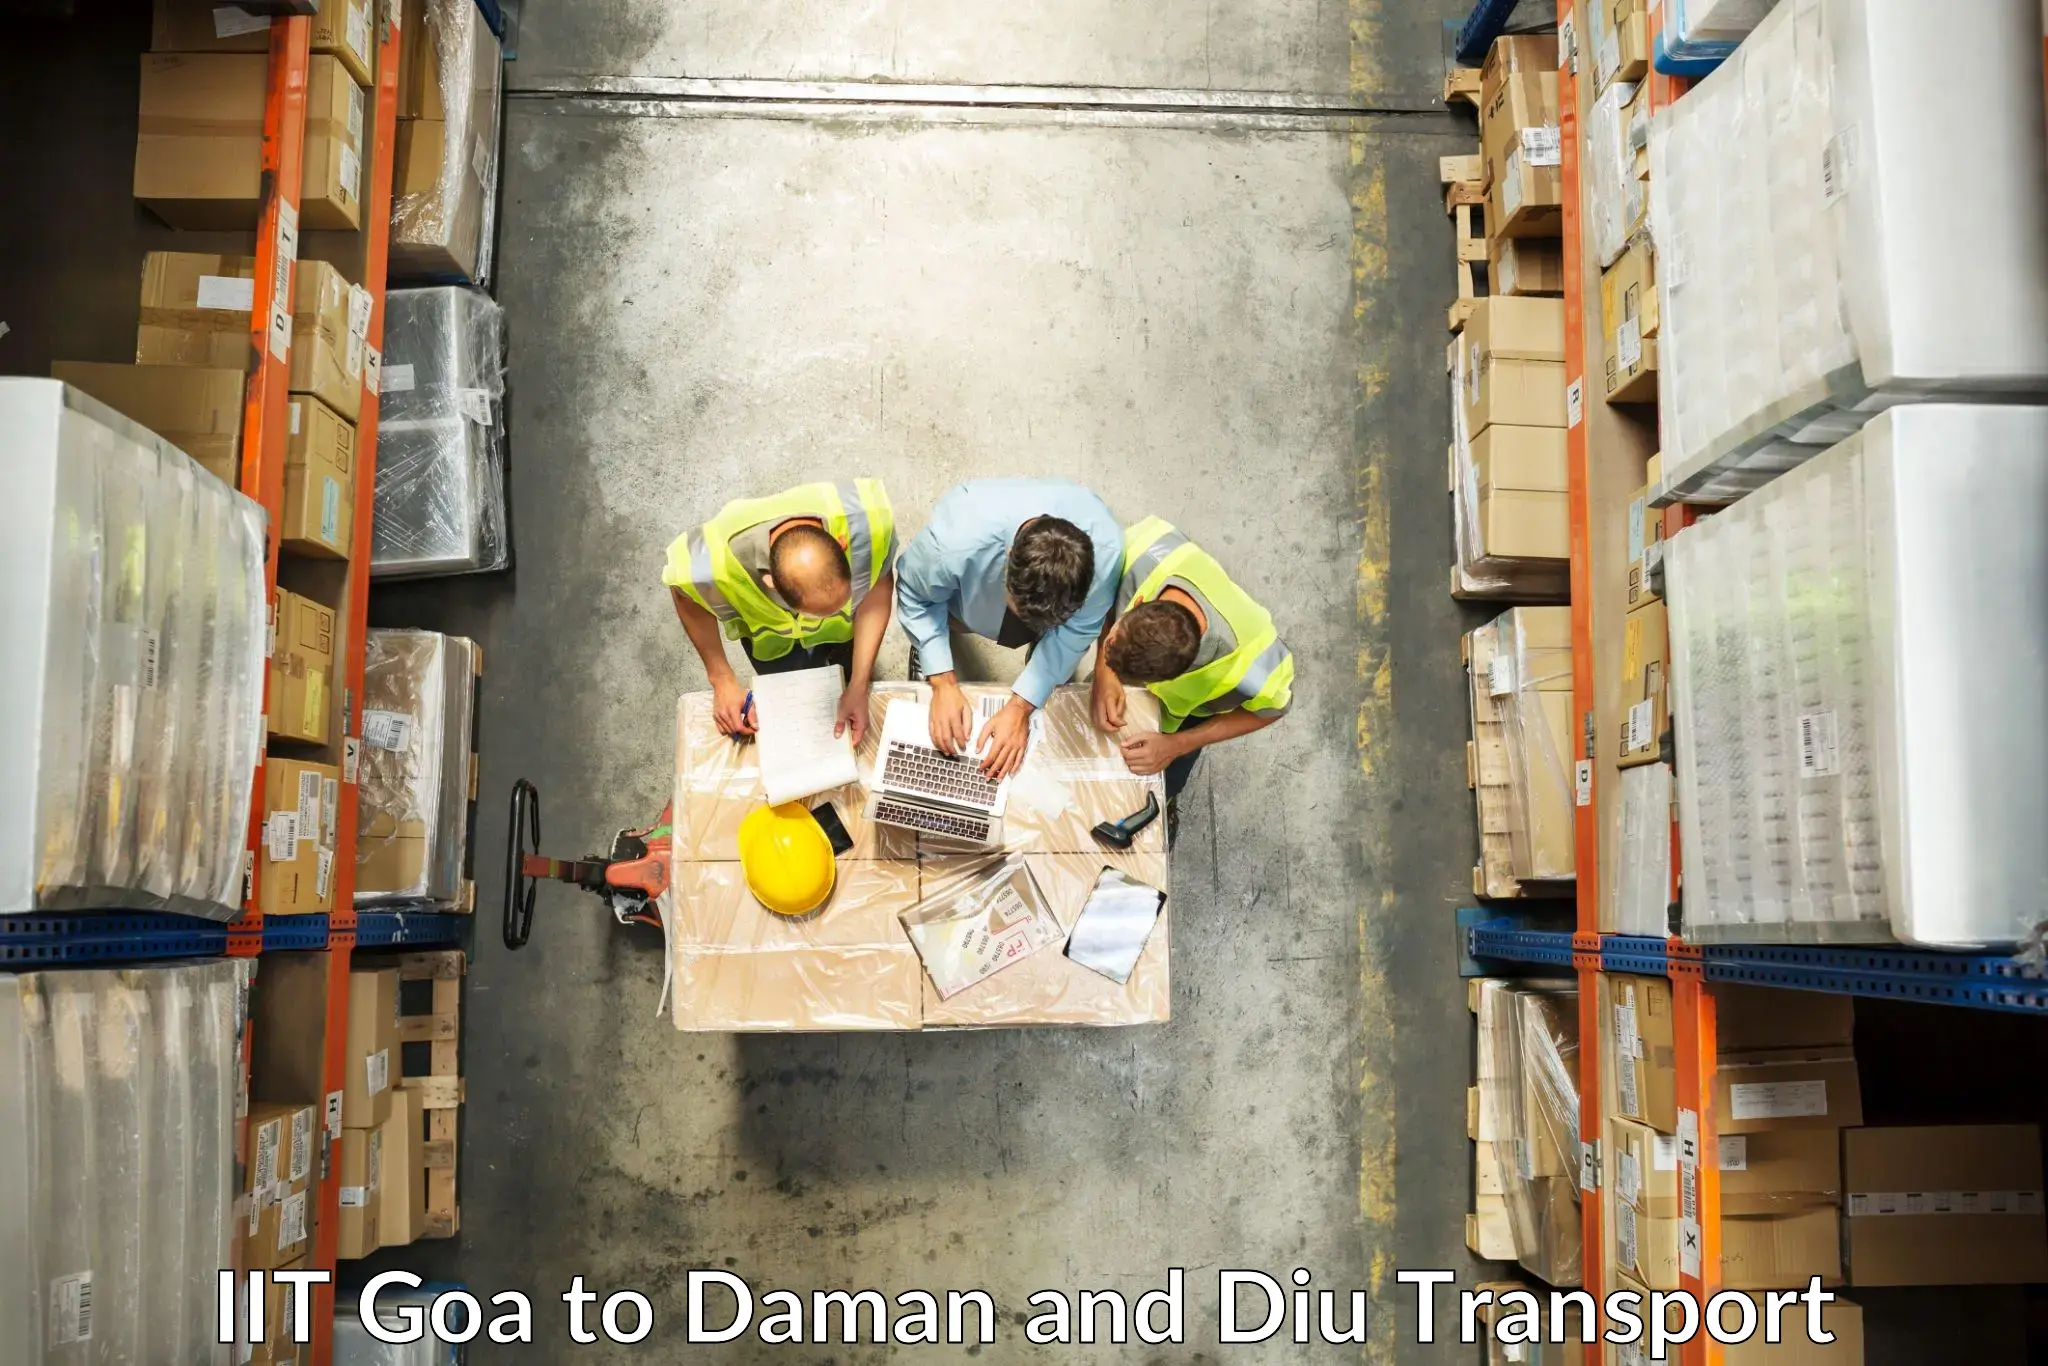 Container transport service IIT Goa to Diu